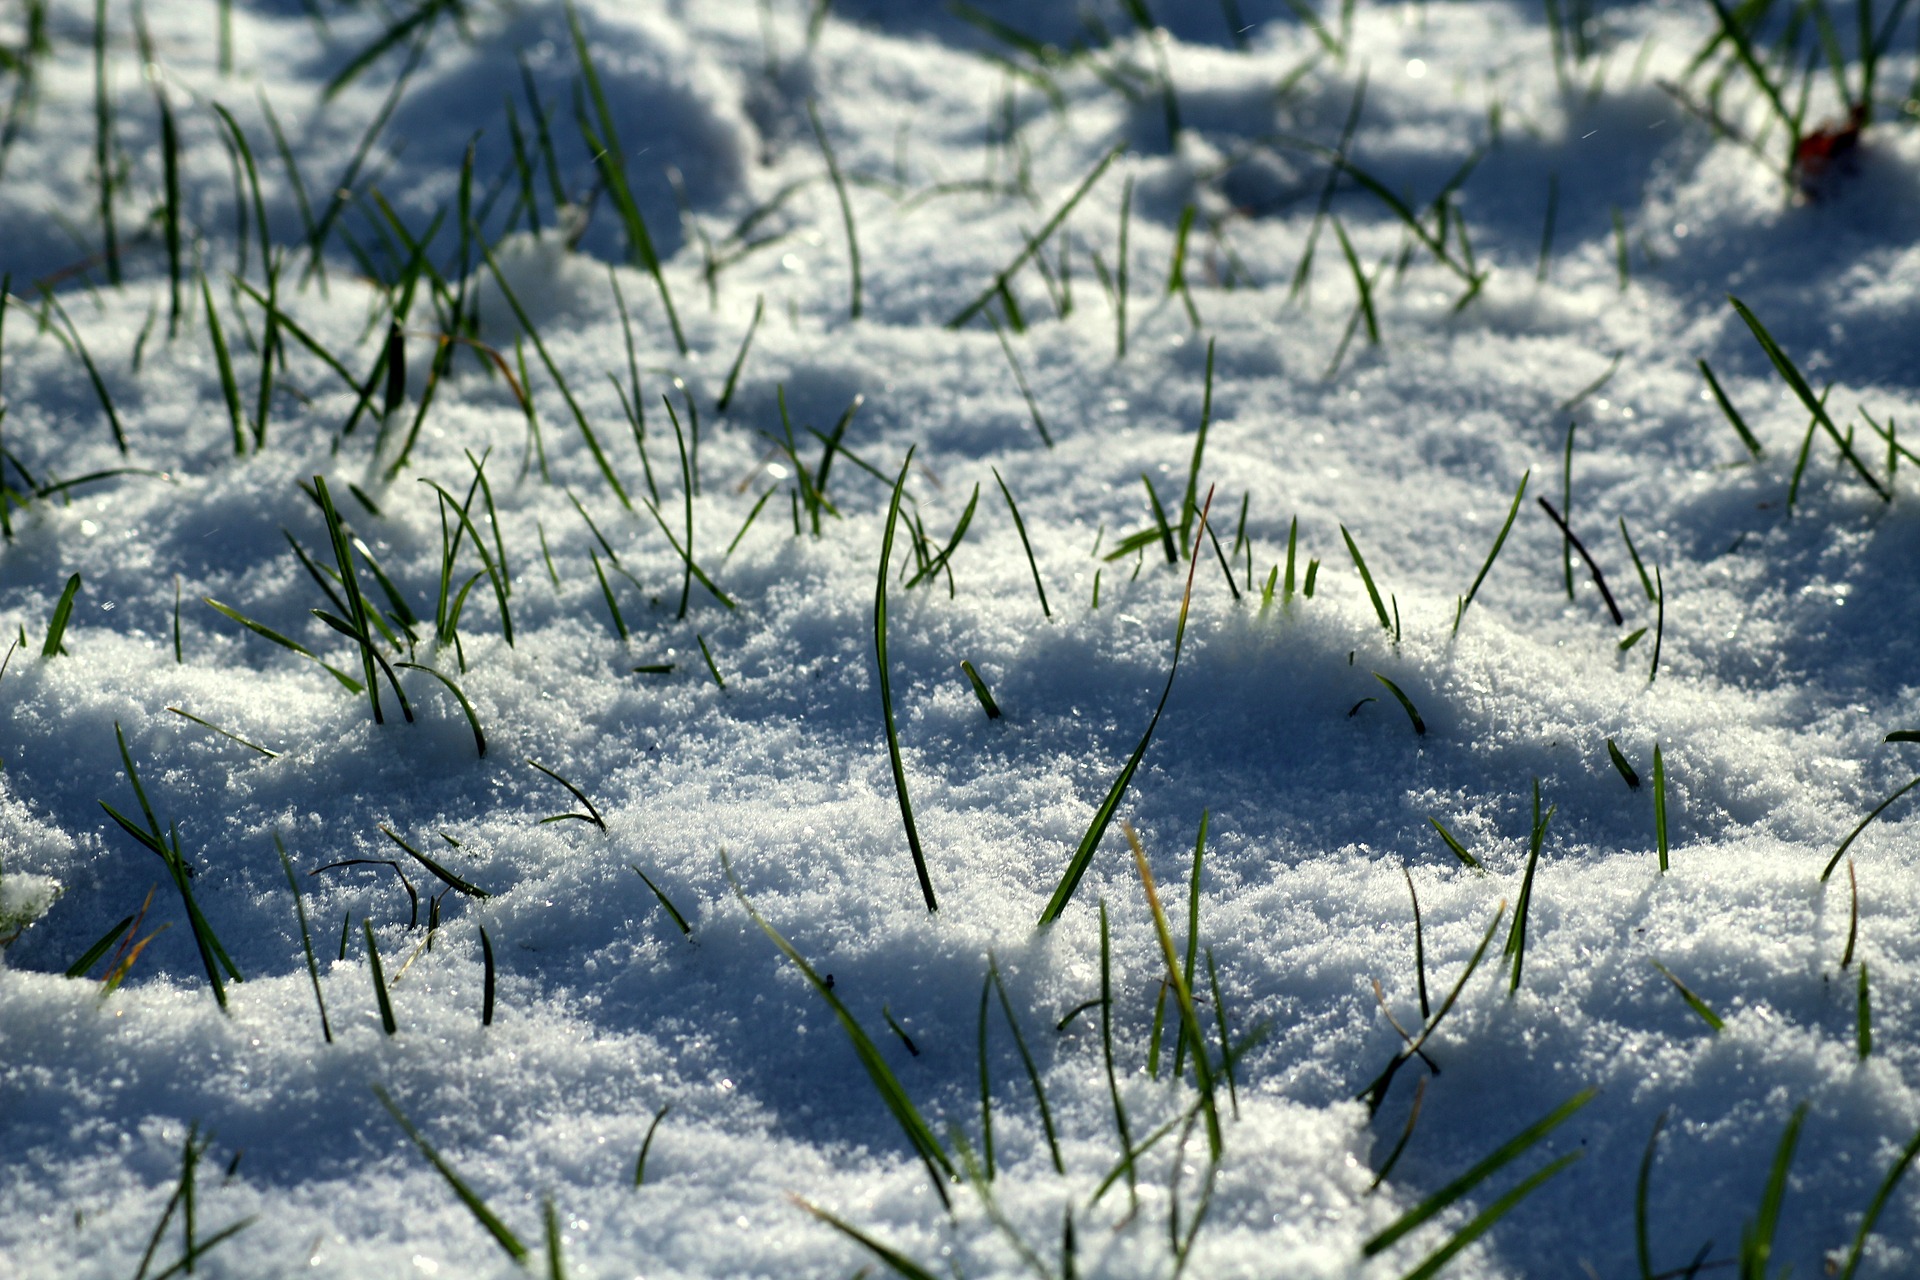 As winter turns to spring, it could reveal a damaged lawn that needs to be nursed back to health